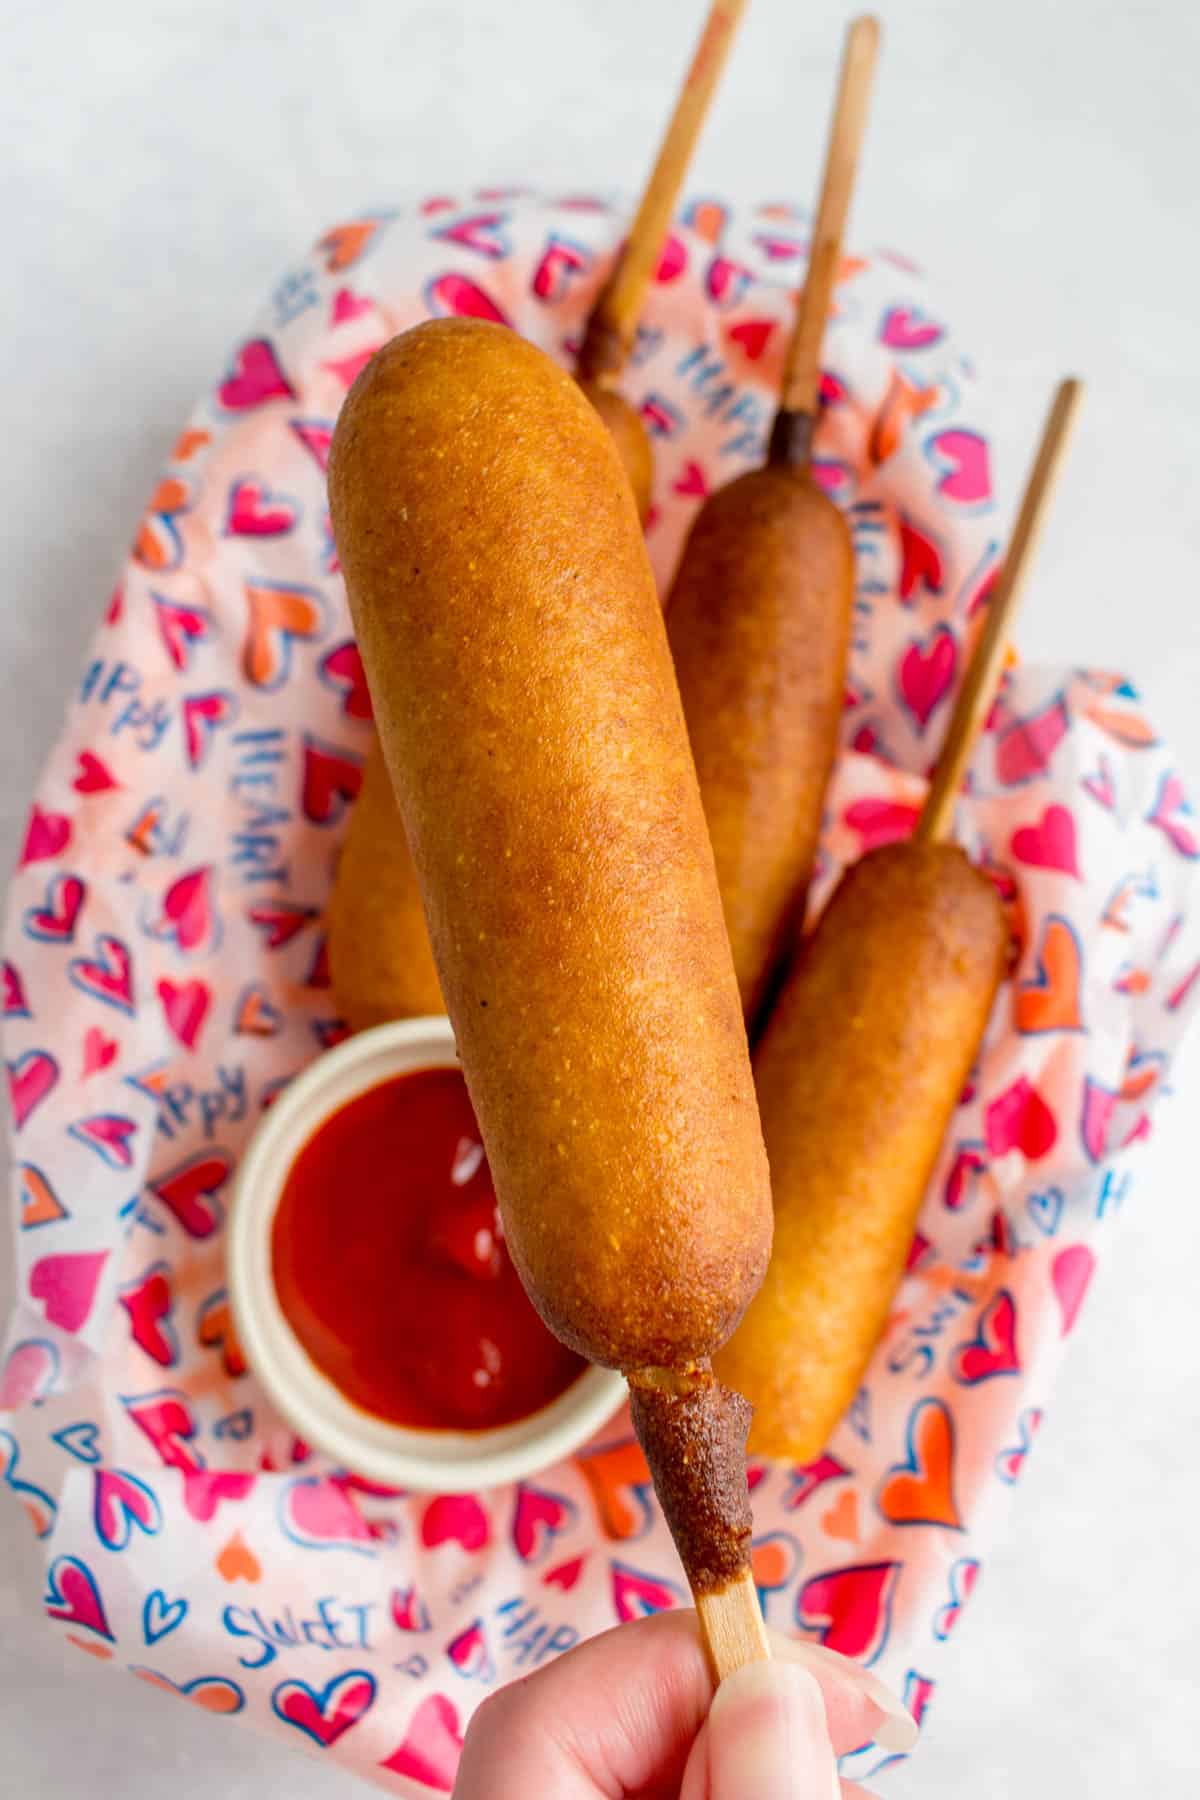 A corn dog being held up.